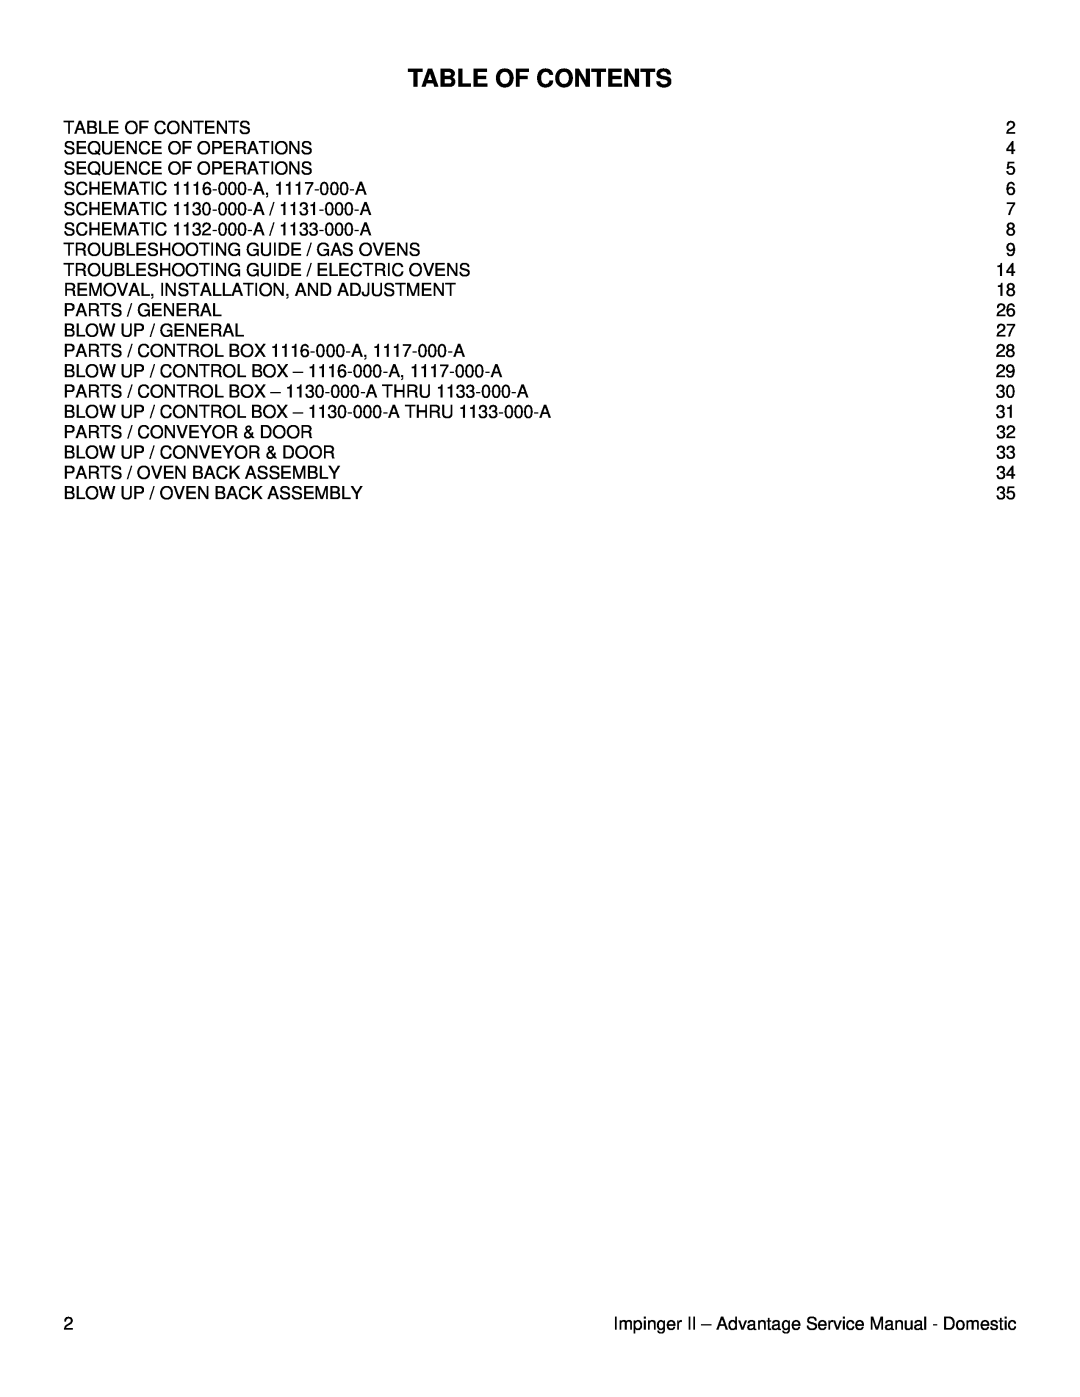 Lincoln II - Advantage Series service manual Table Of Contents 